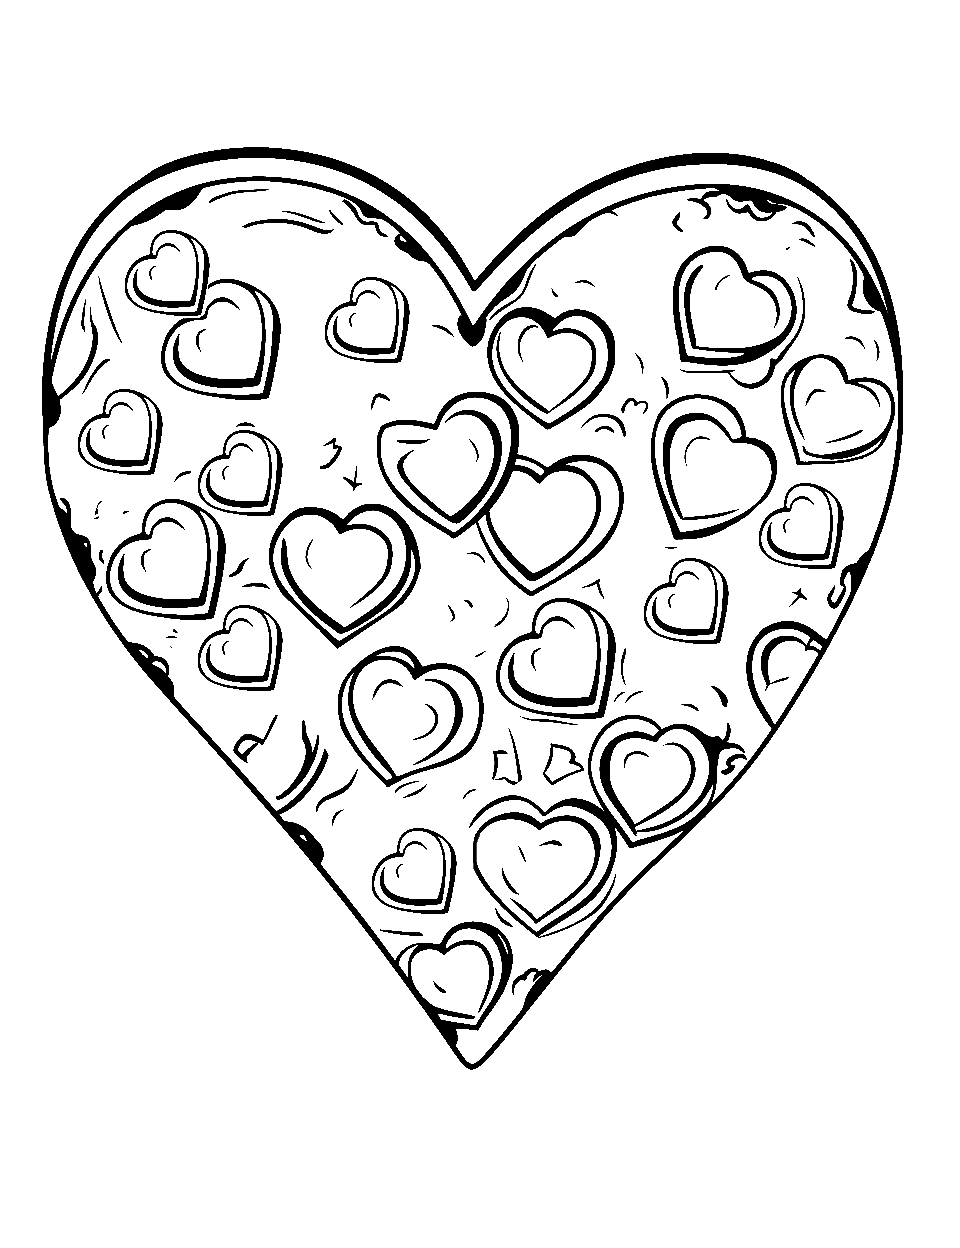 Heart-Shaped Pizza Slice Coloring Page - A pizza slice with heart-shaped pepperoni.